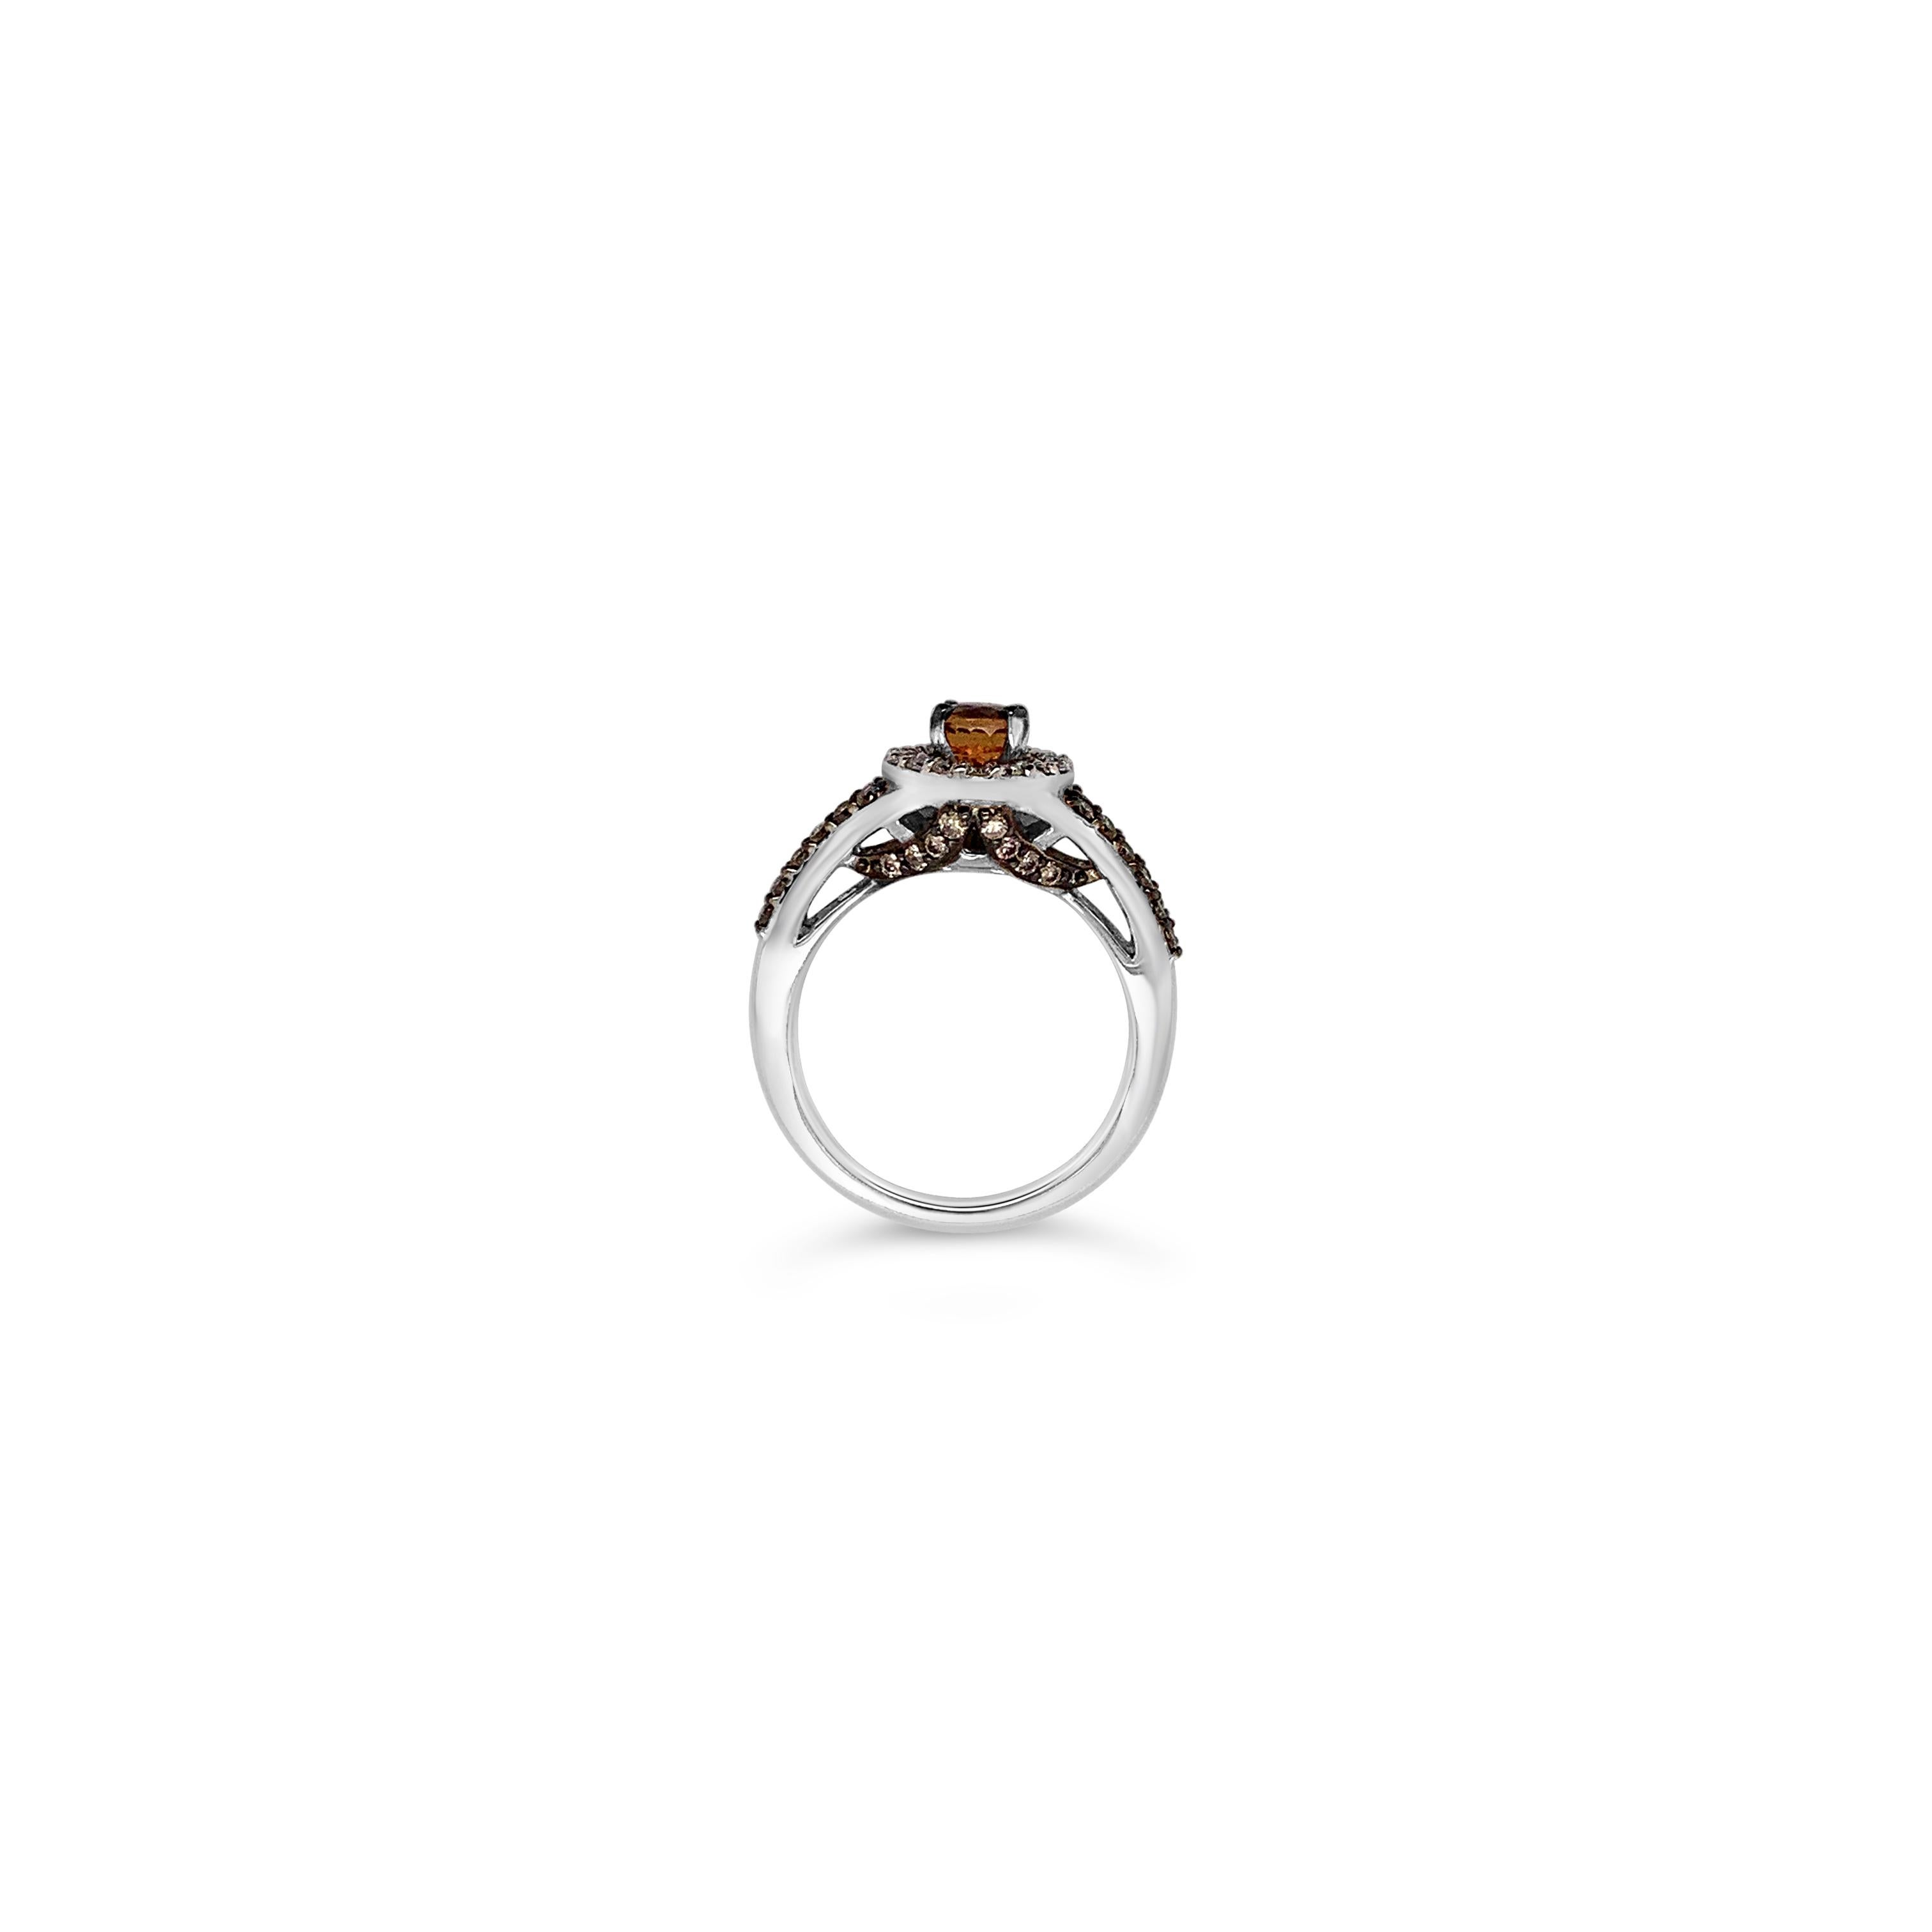 Le Vian Bridal® Ring featuring 0.95 cts. Fancy Sapphire, 0.45 cts. Chocolate Diamonds® , 0.18 cts. Vanilla Diamonds®  set in 14K Vanilla Gold®
Ring size 6.5

A Perfect Gift – Looking for a birthday or Mother’s Day gift idea for your mom, daughter,